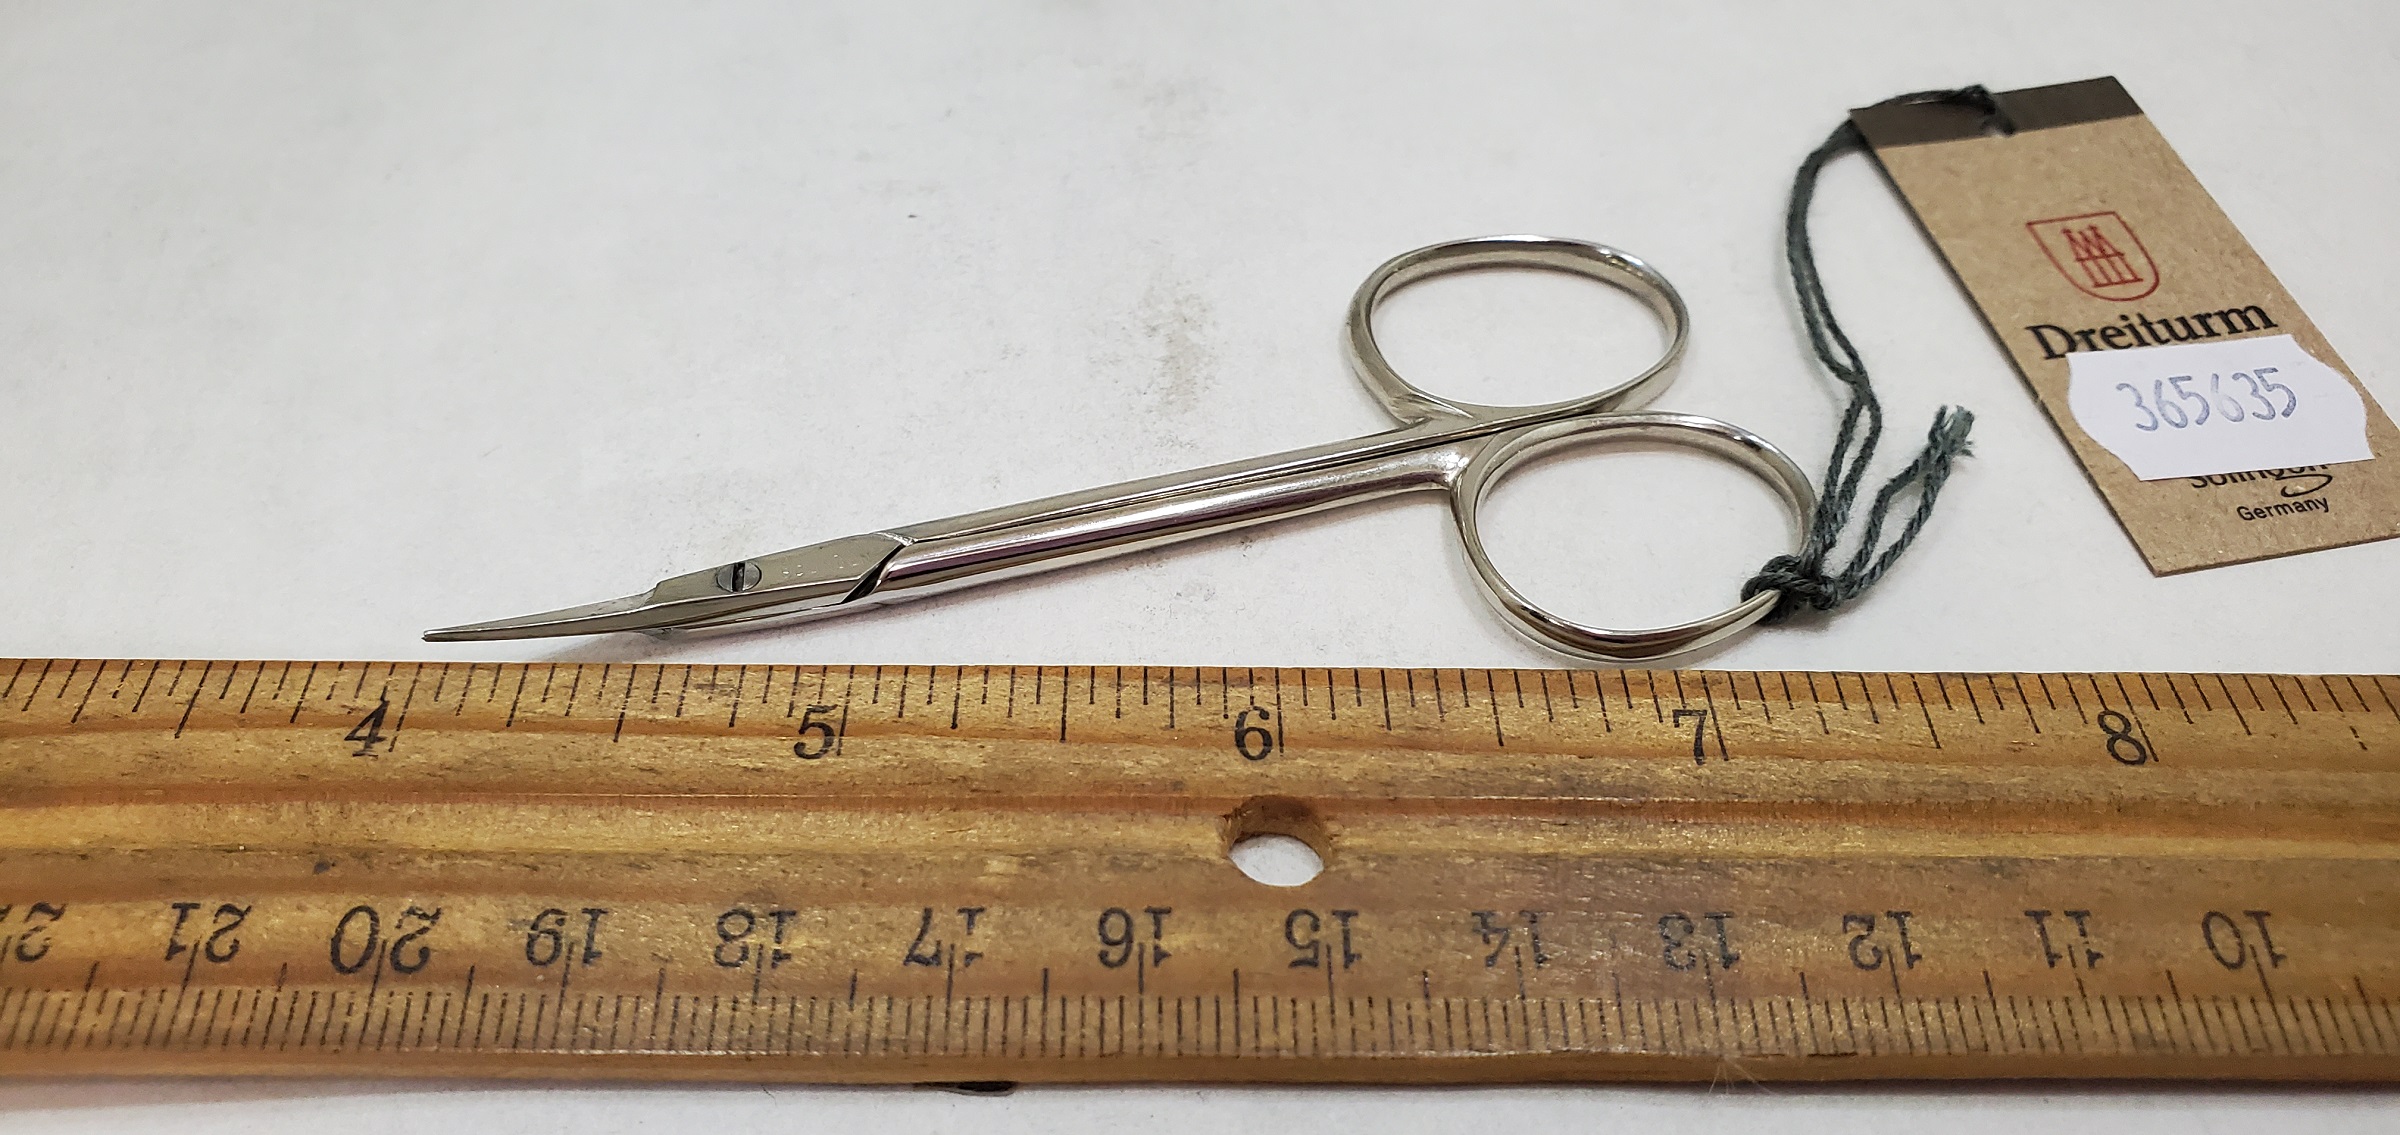 Specialty Forged Buttonhole Scissors and Applique Scissors Handle Offset 6